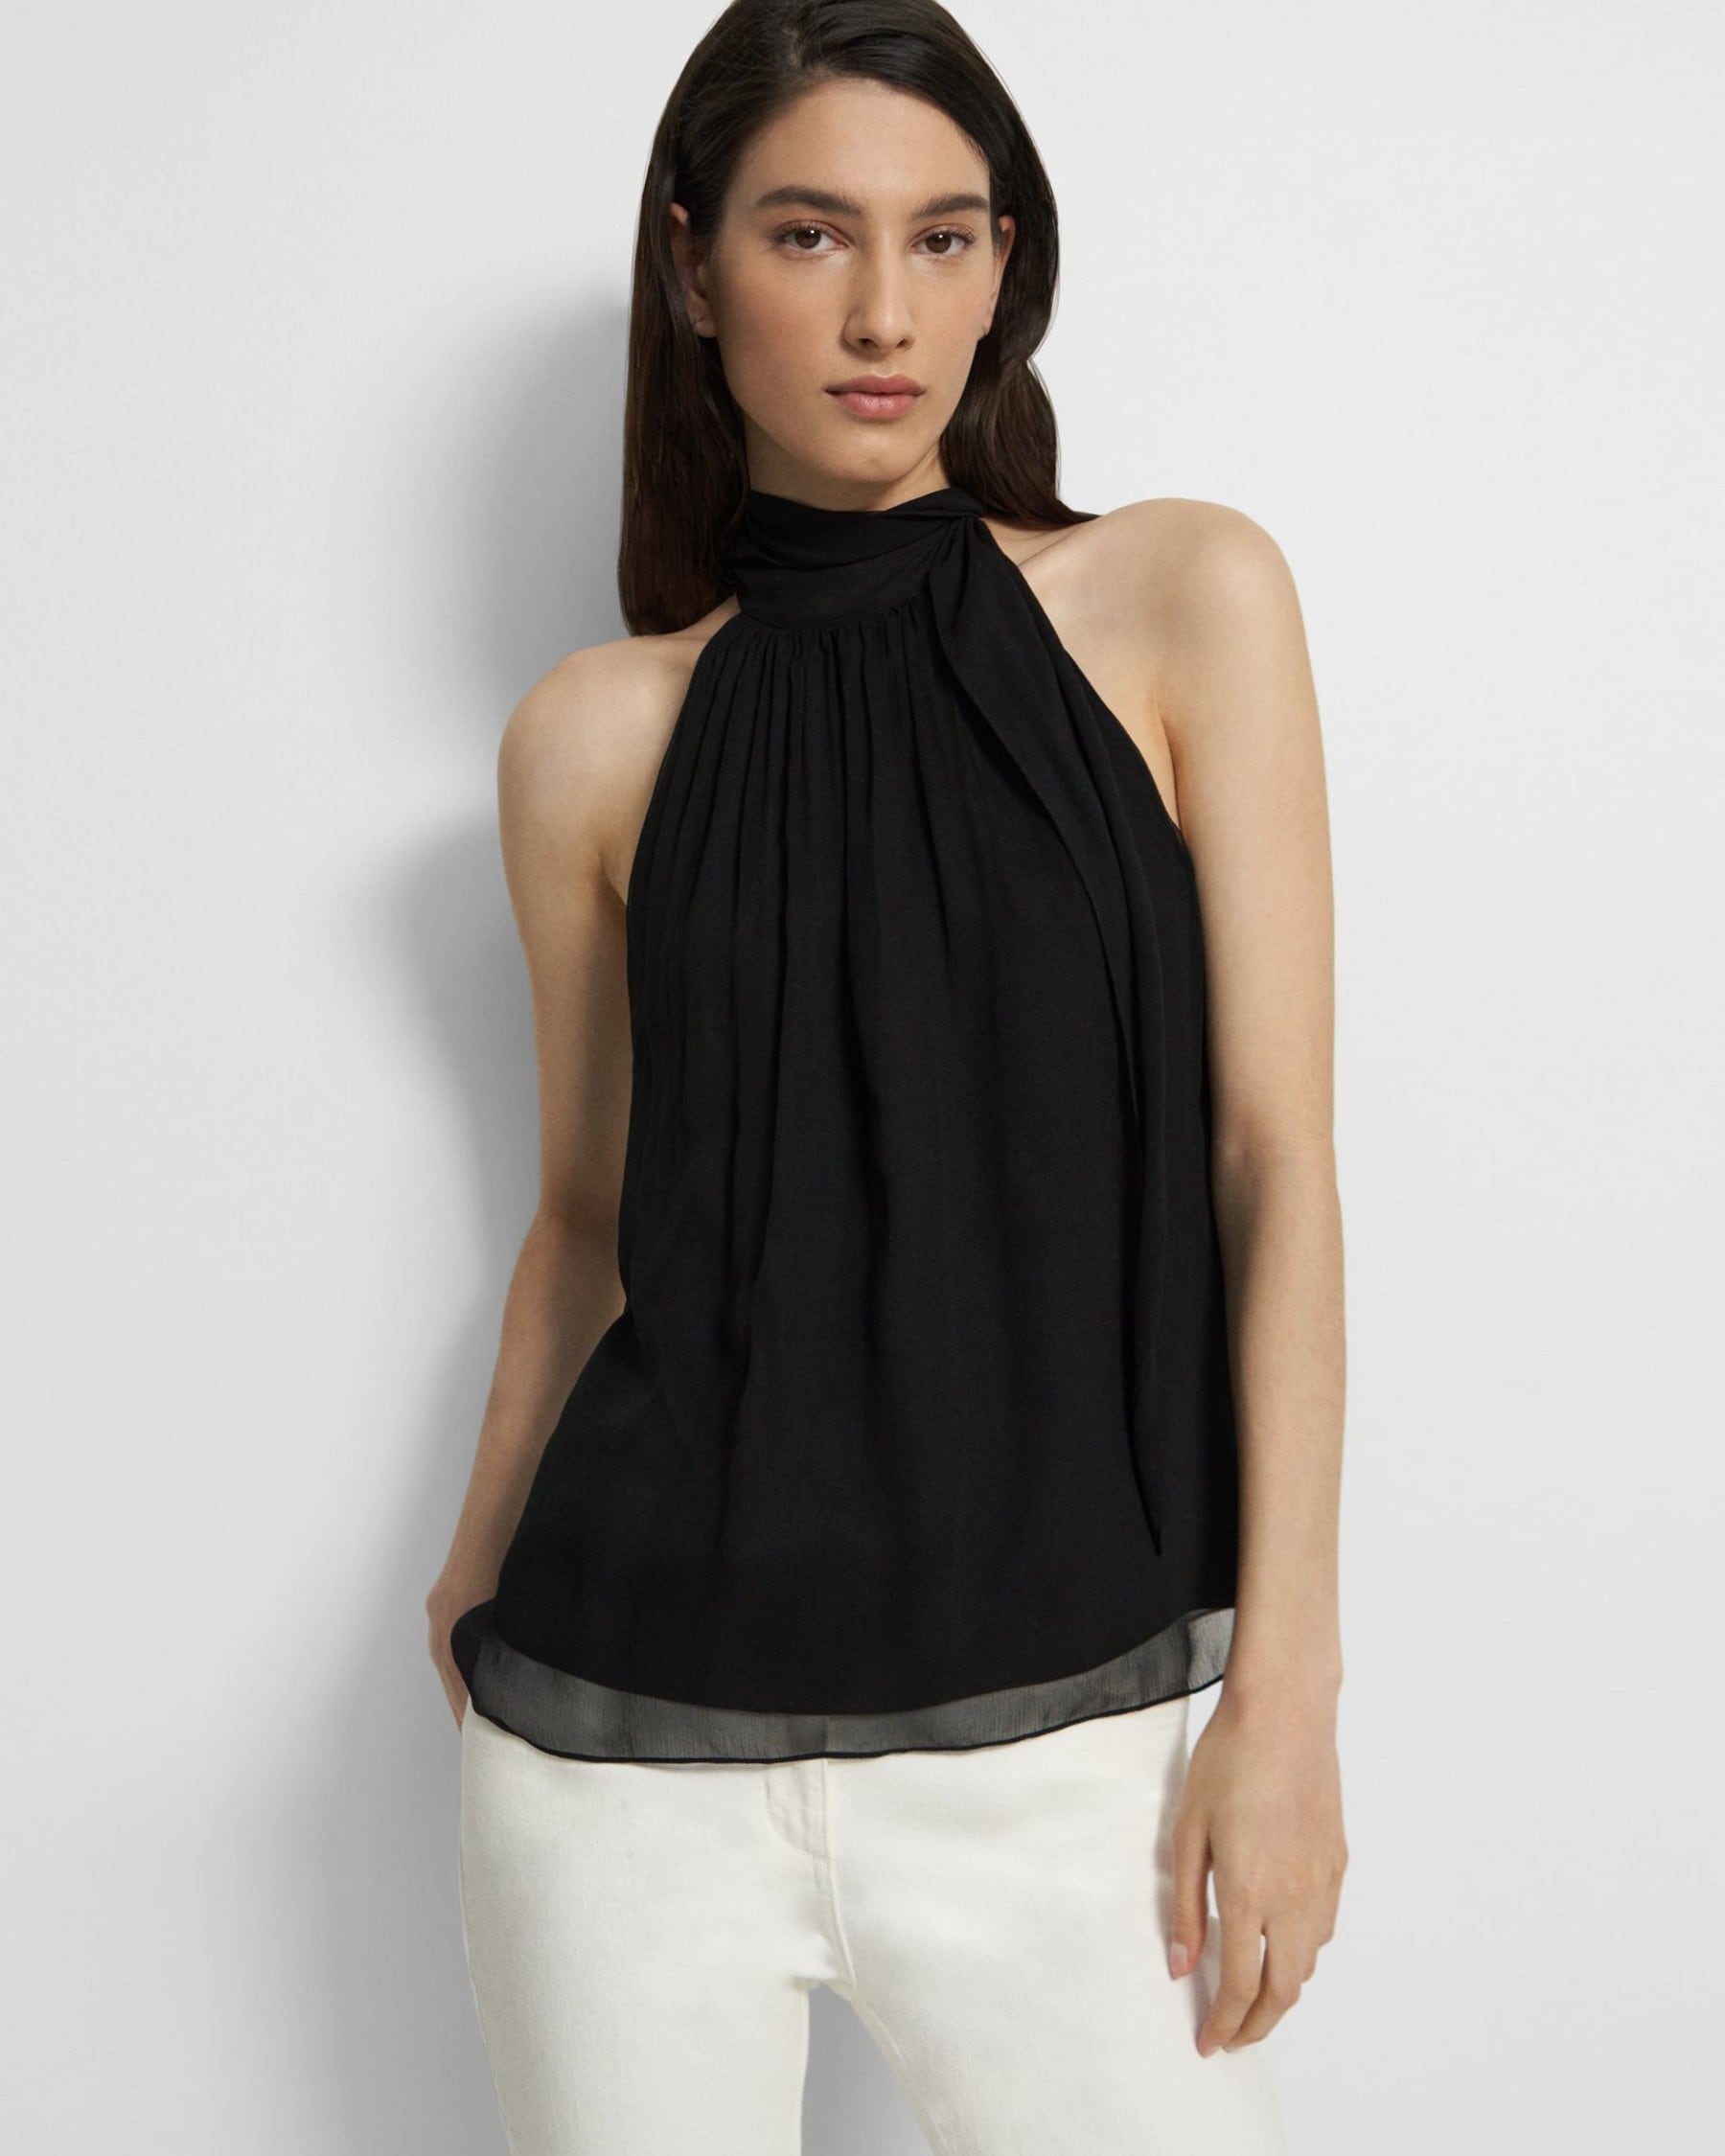 HALTER TOP WITH BOWS - Black